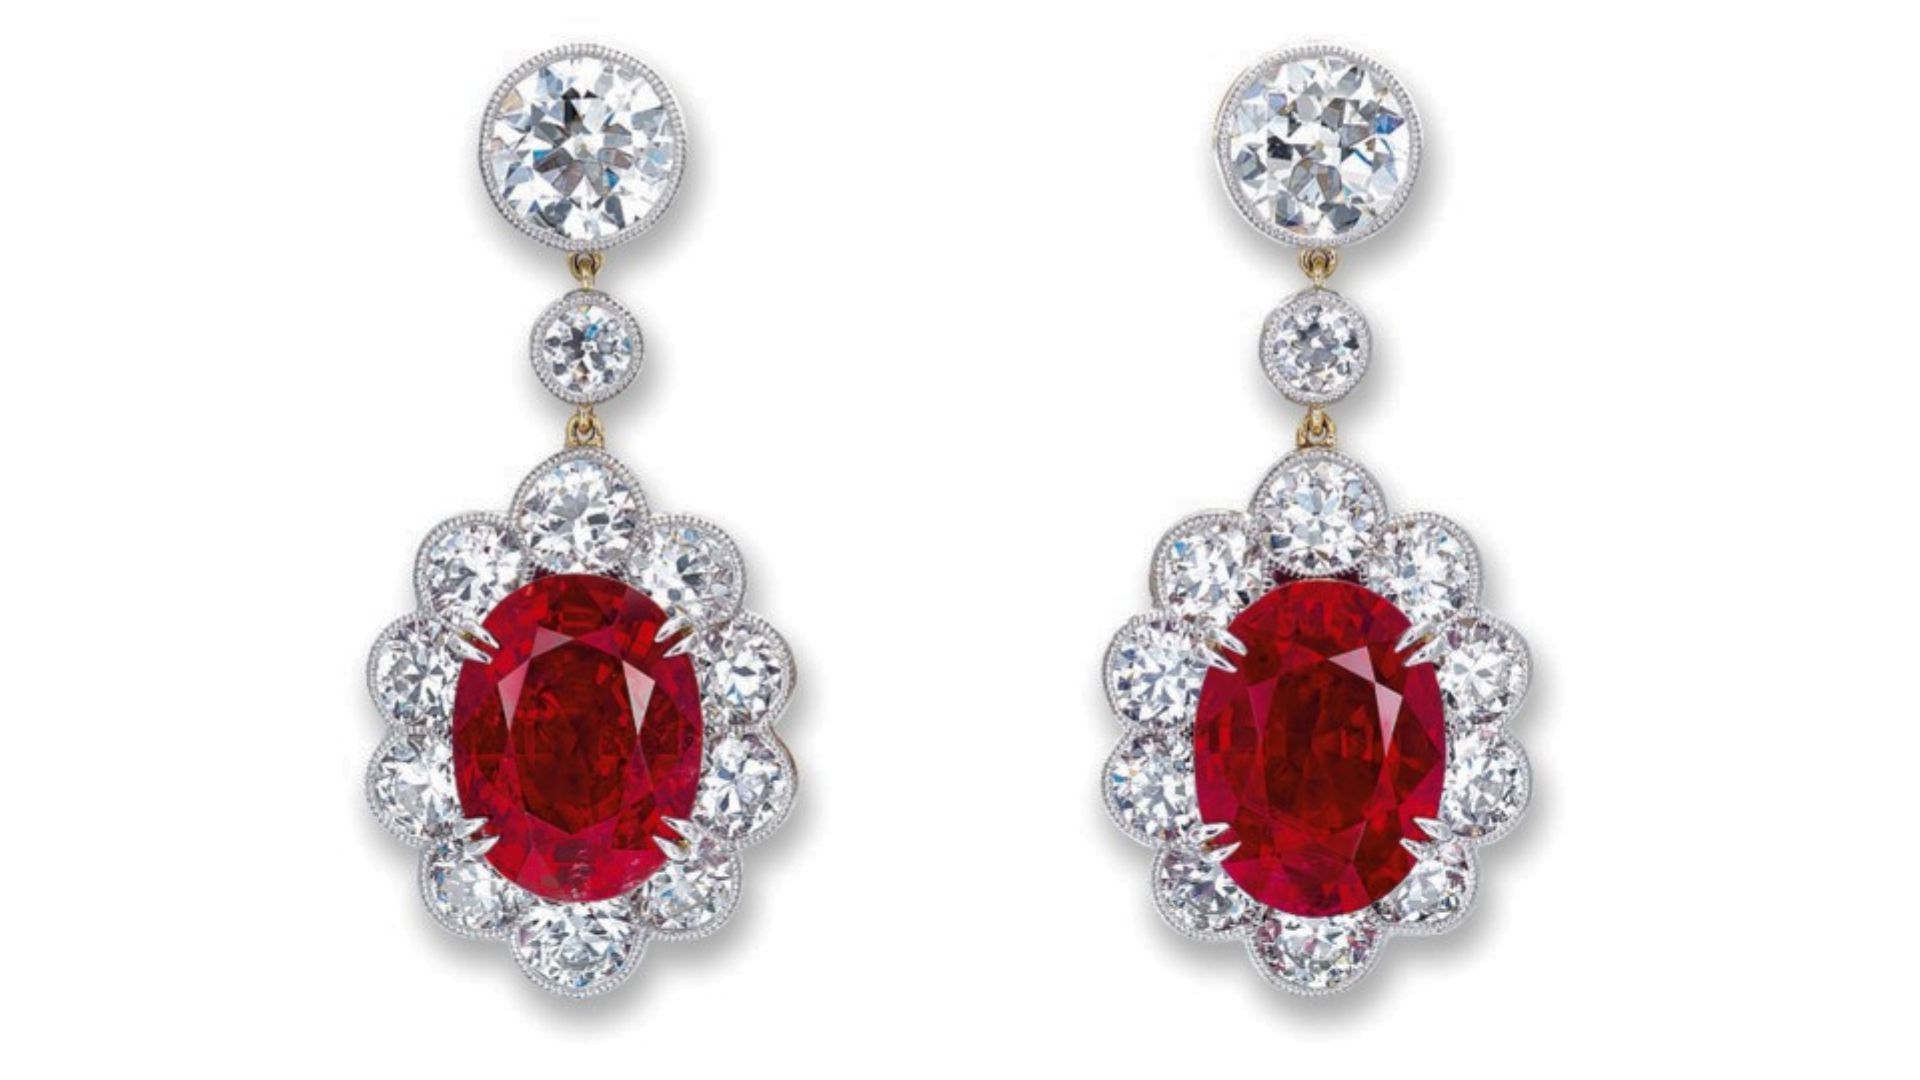 Expensive earrings - Ruby and diamond